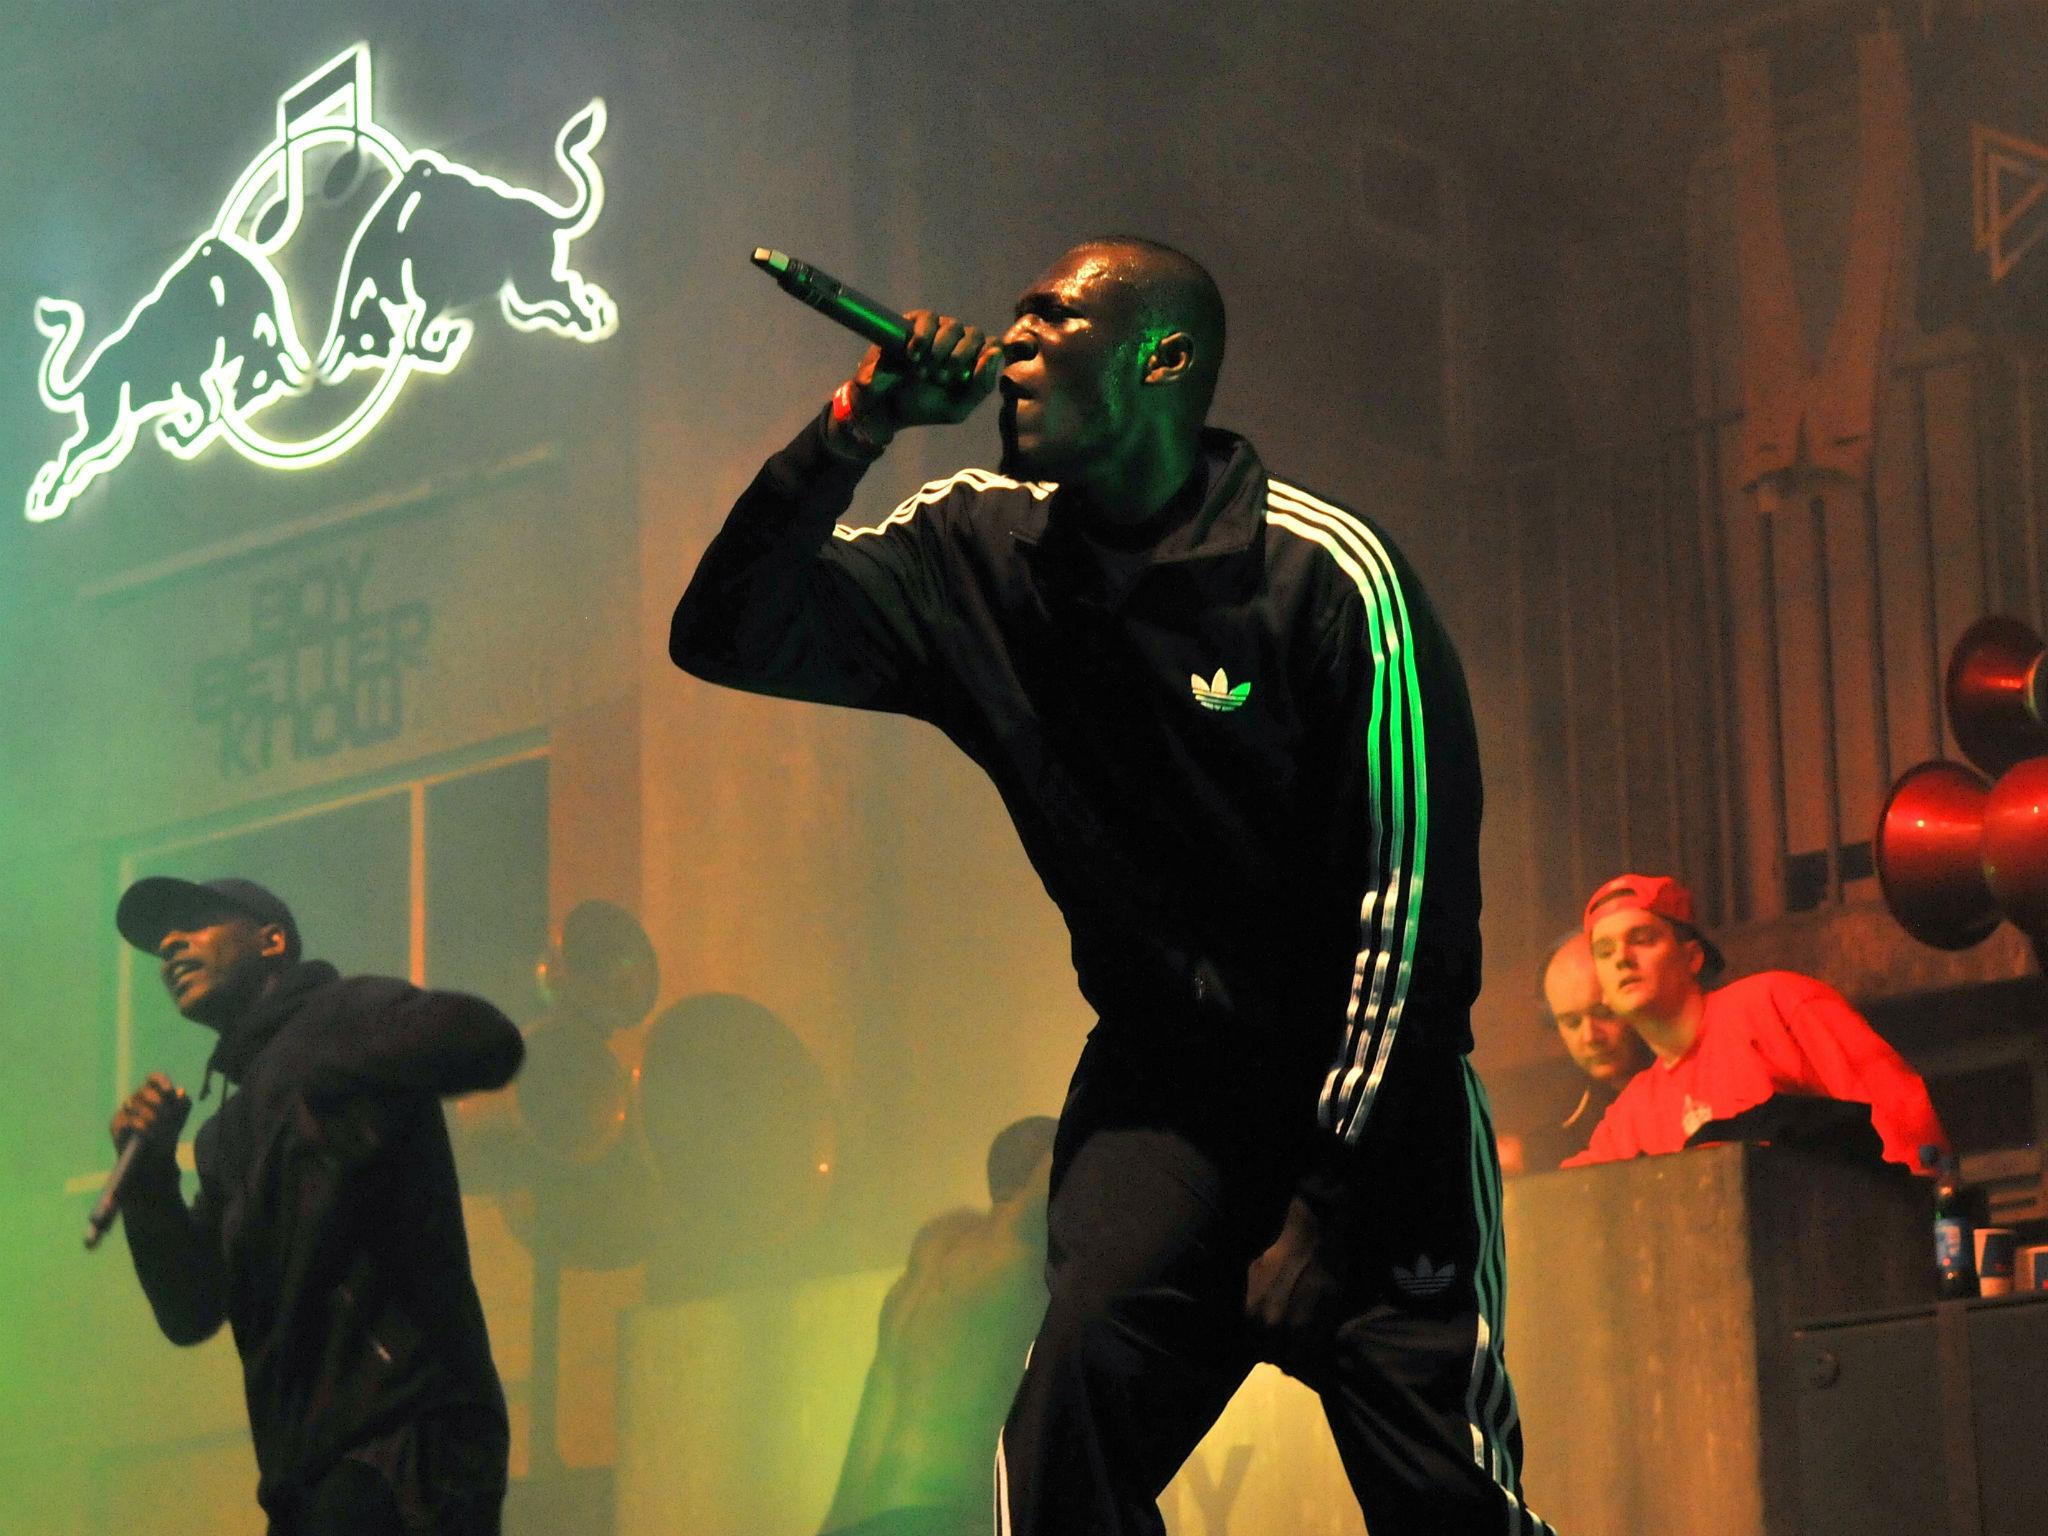 Stormzy is the figurehead of grime and some fans want him as prime minister